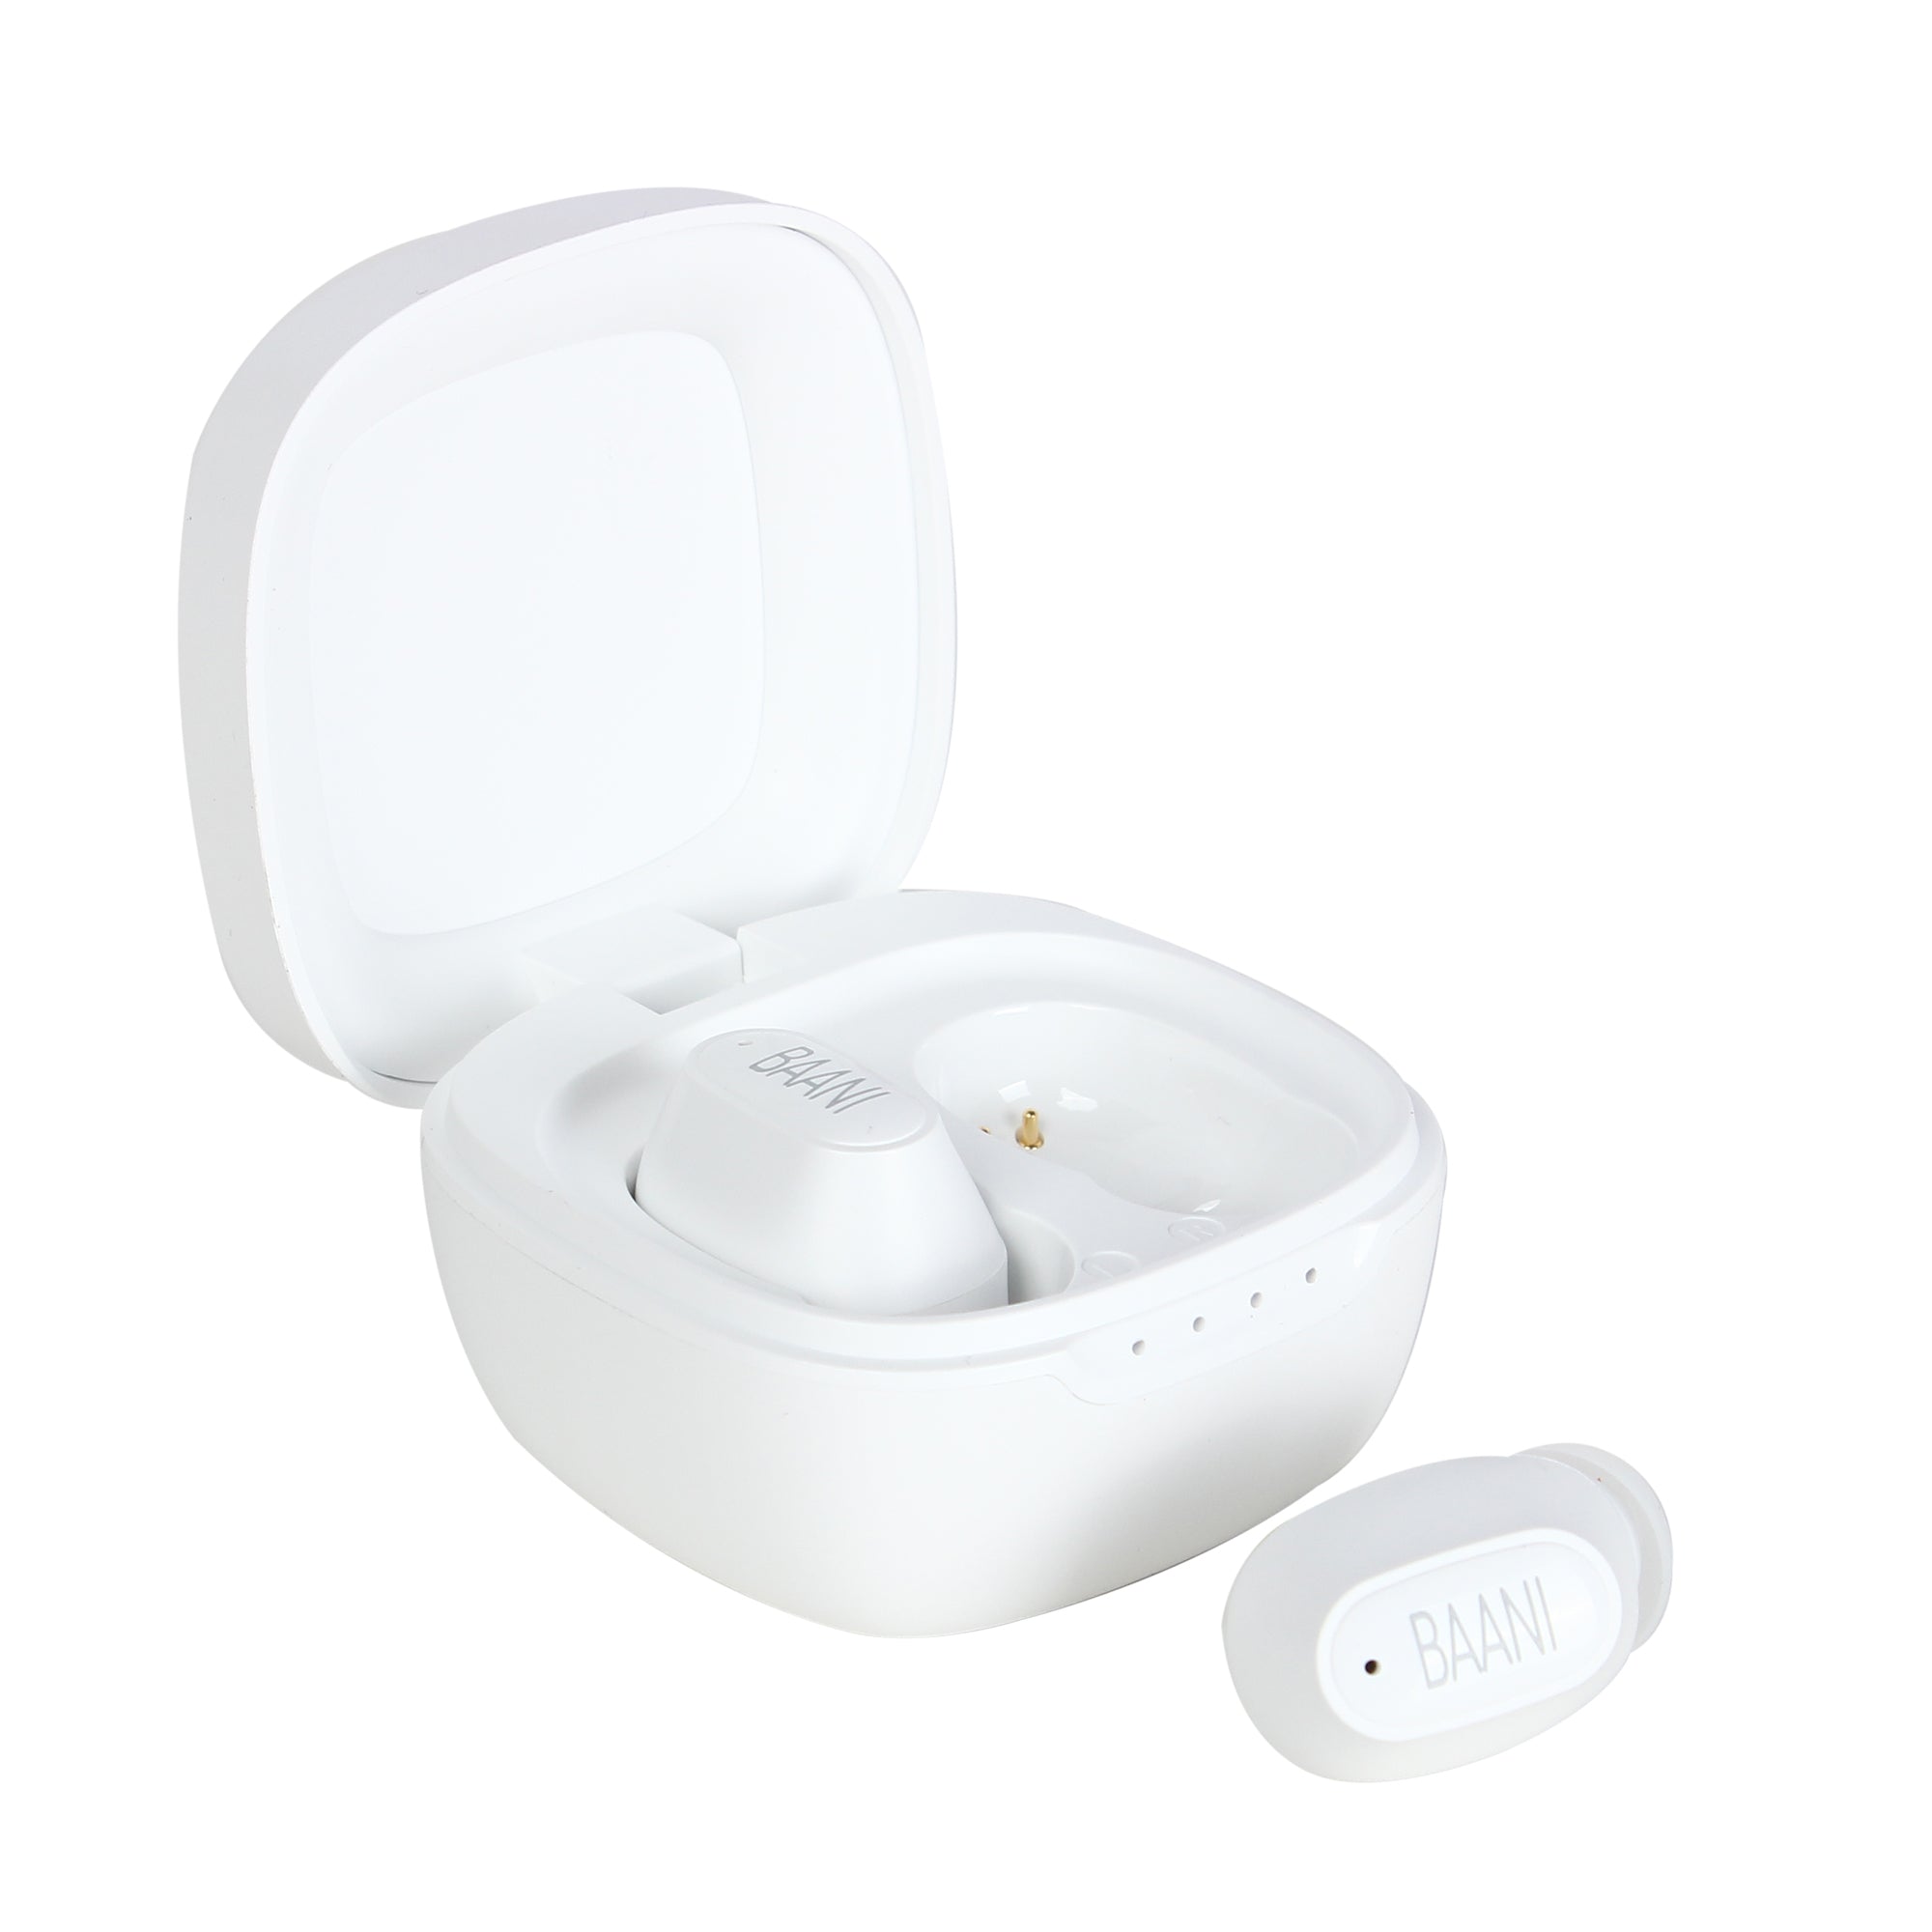 White earbuds case of BT 104 by Baani Audio